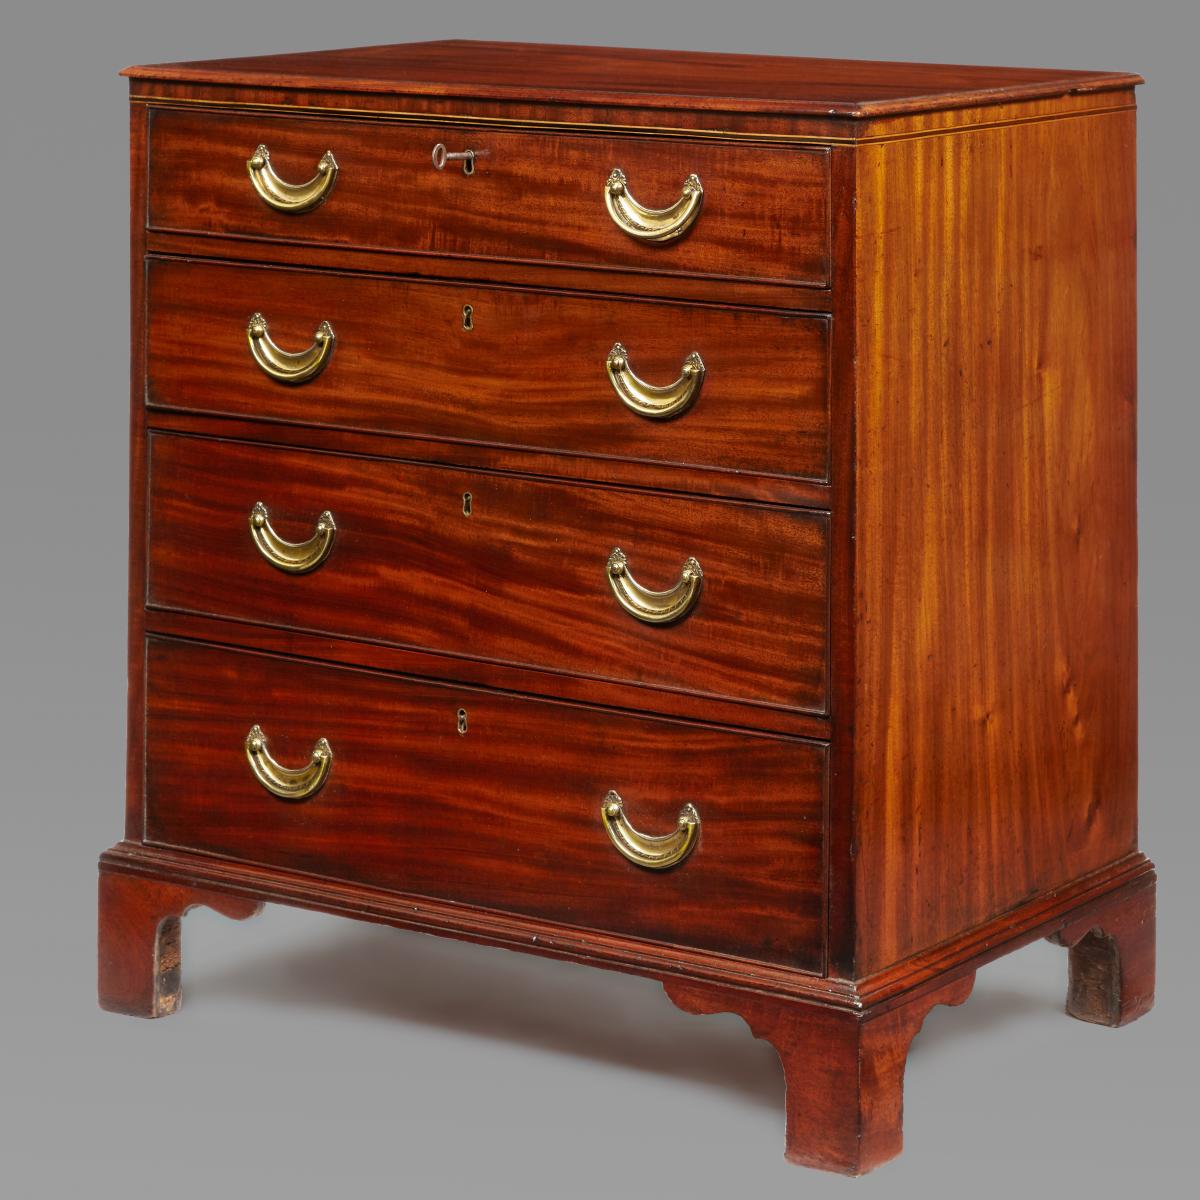 Late 18th Century small mahogany chest of drawers